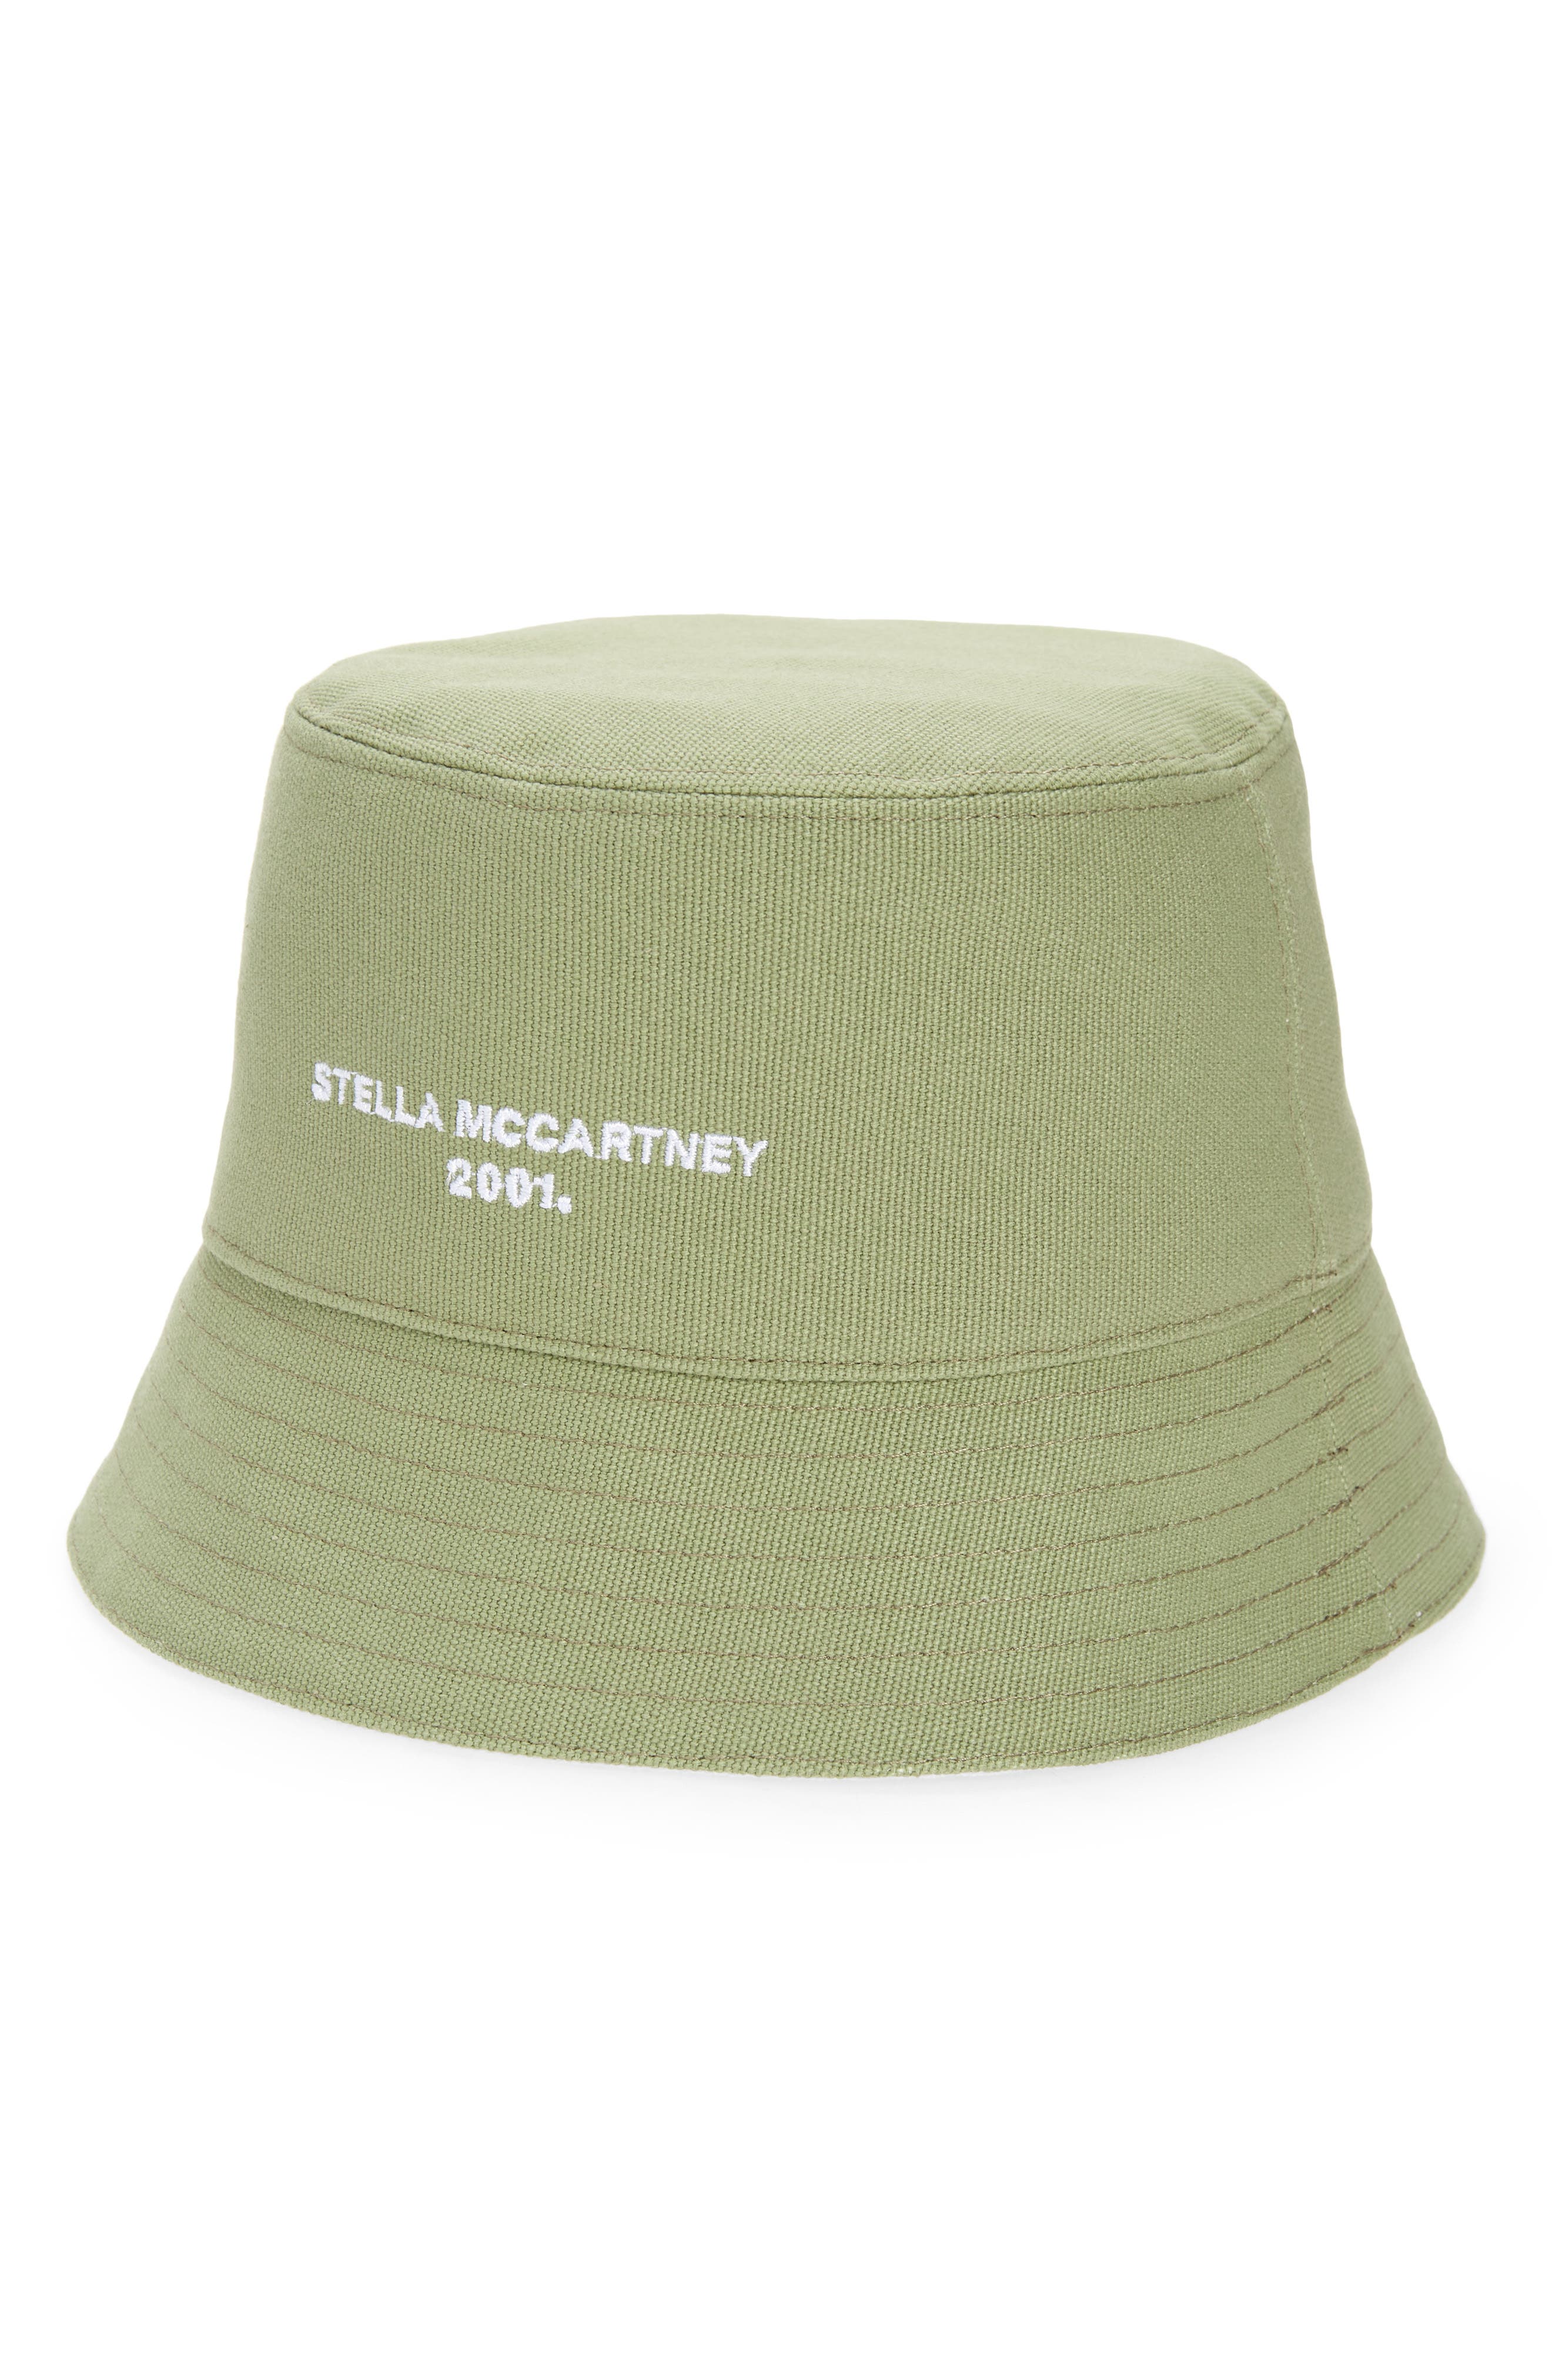 Stella McCartney Embroidered Cotton Button Hat in Bamboo/Ivory